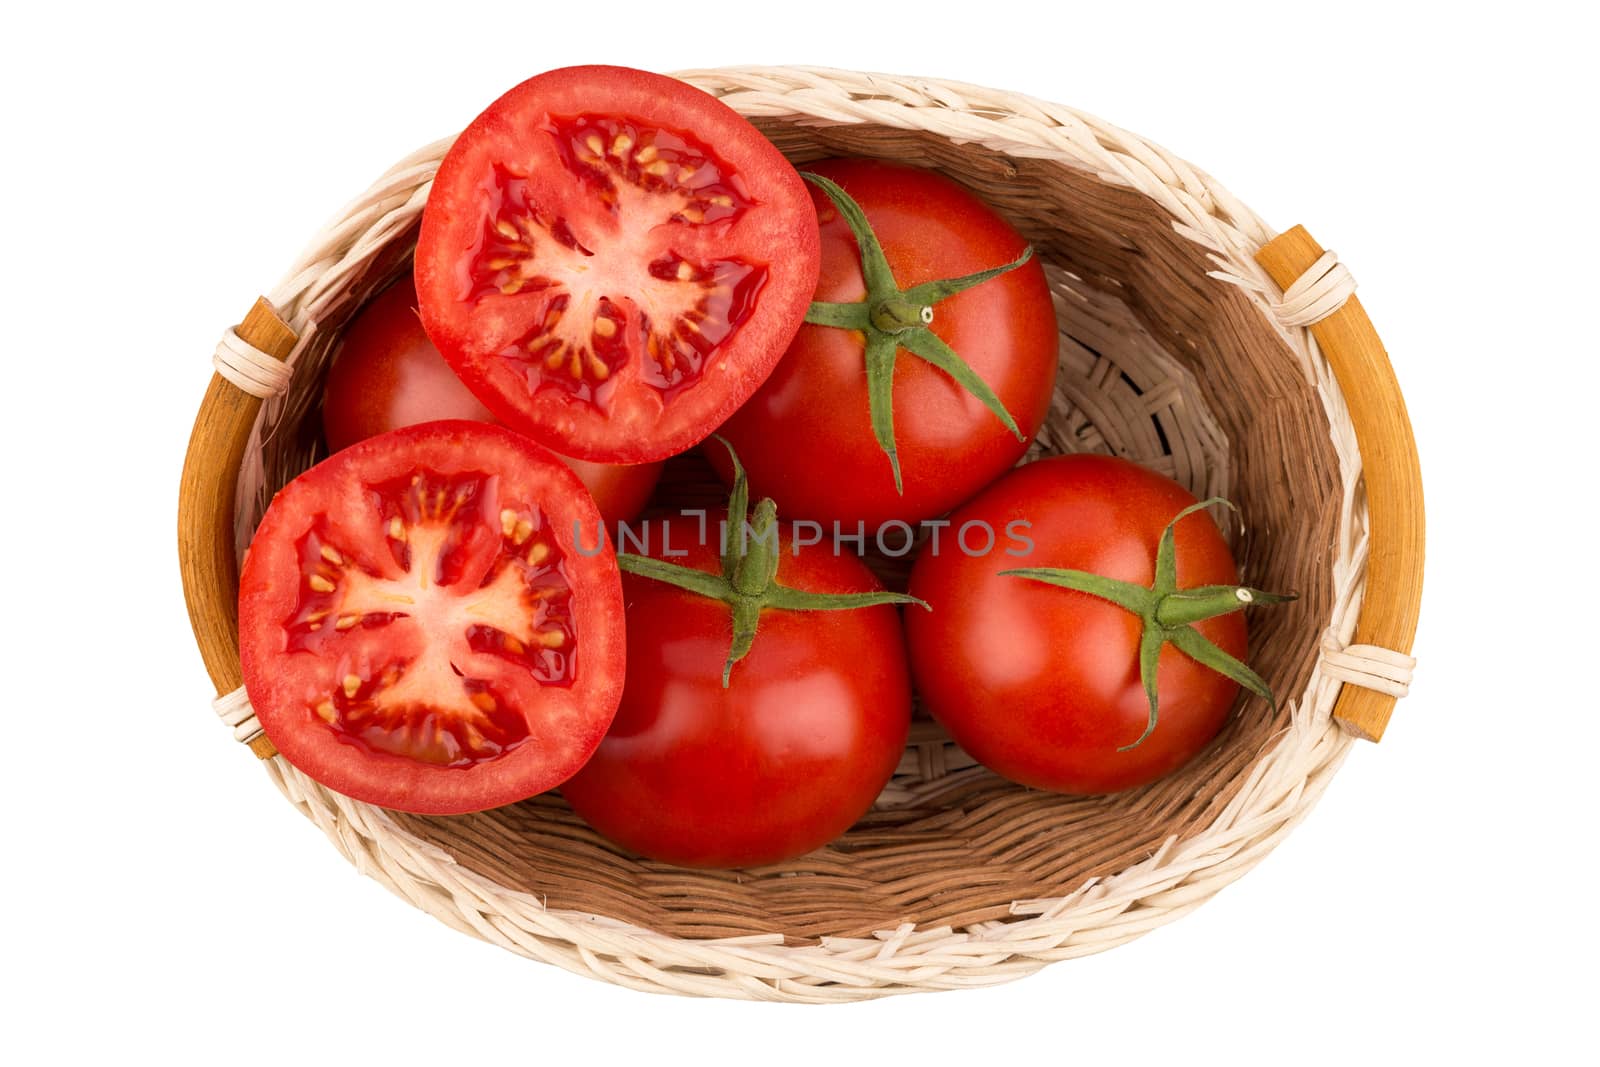 ripe tomatoes in a wicker basket isolated on white background by DGolbay